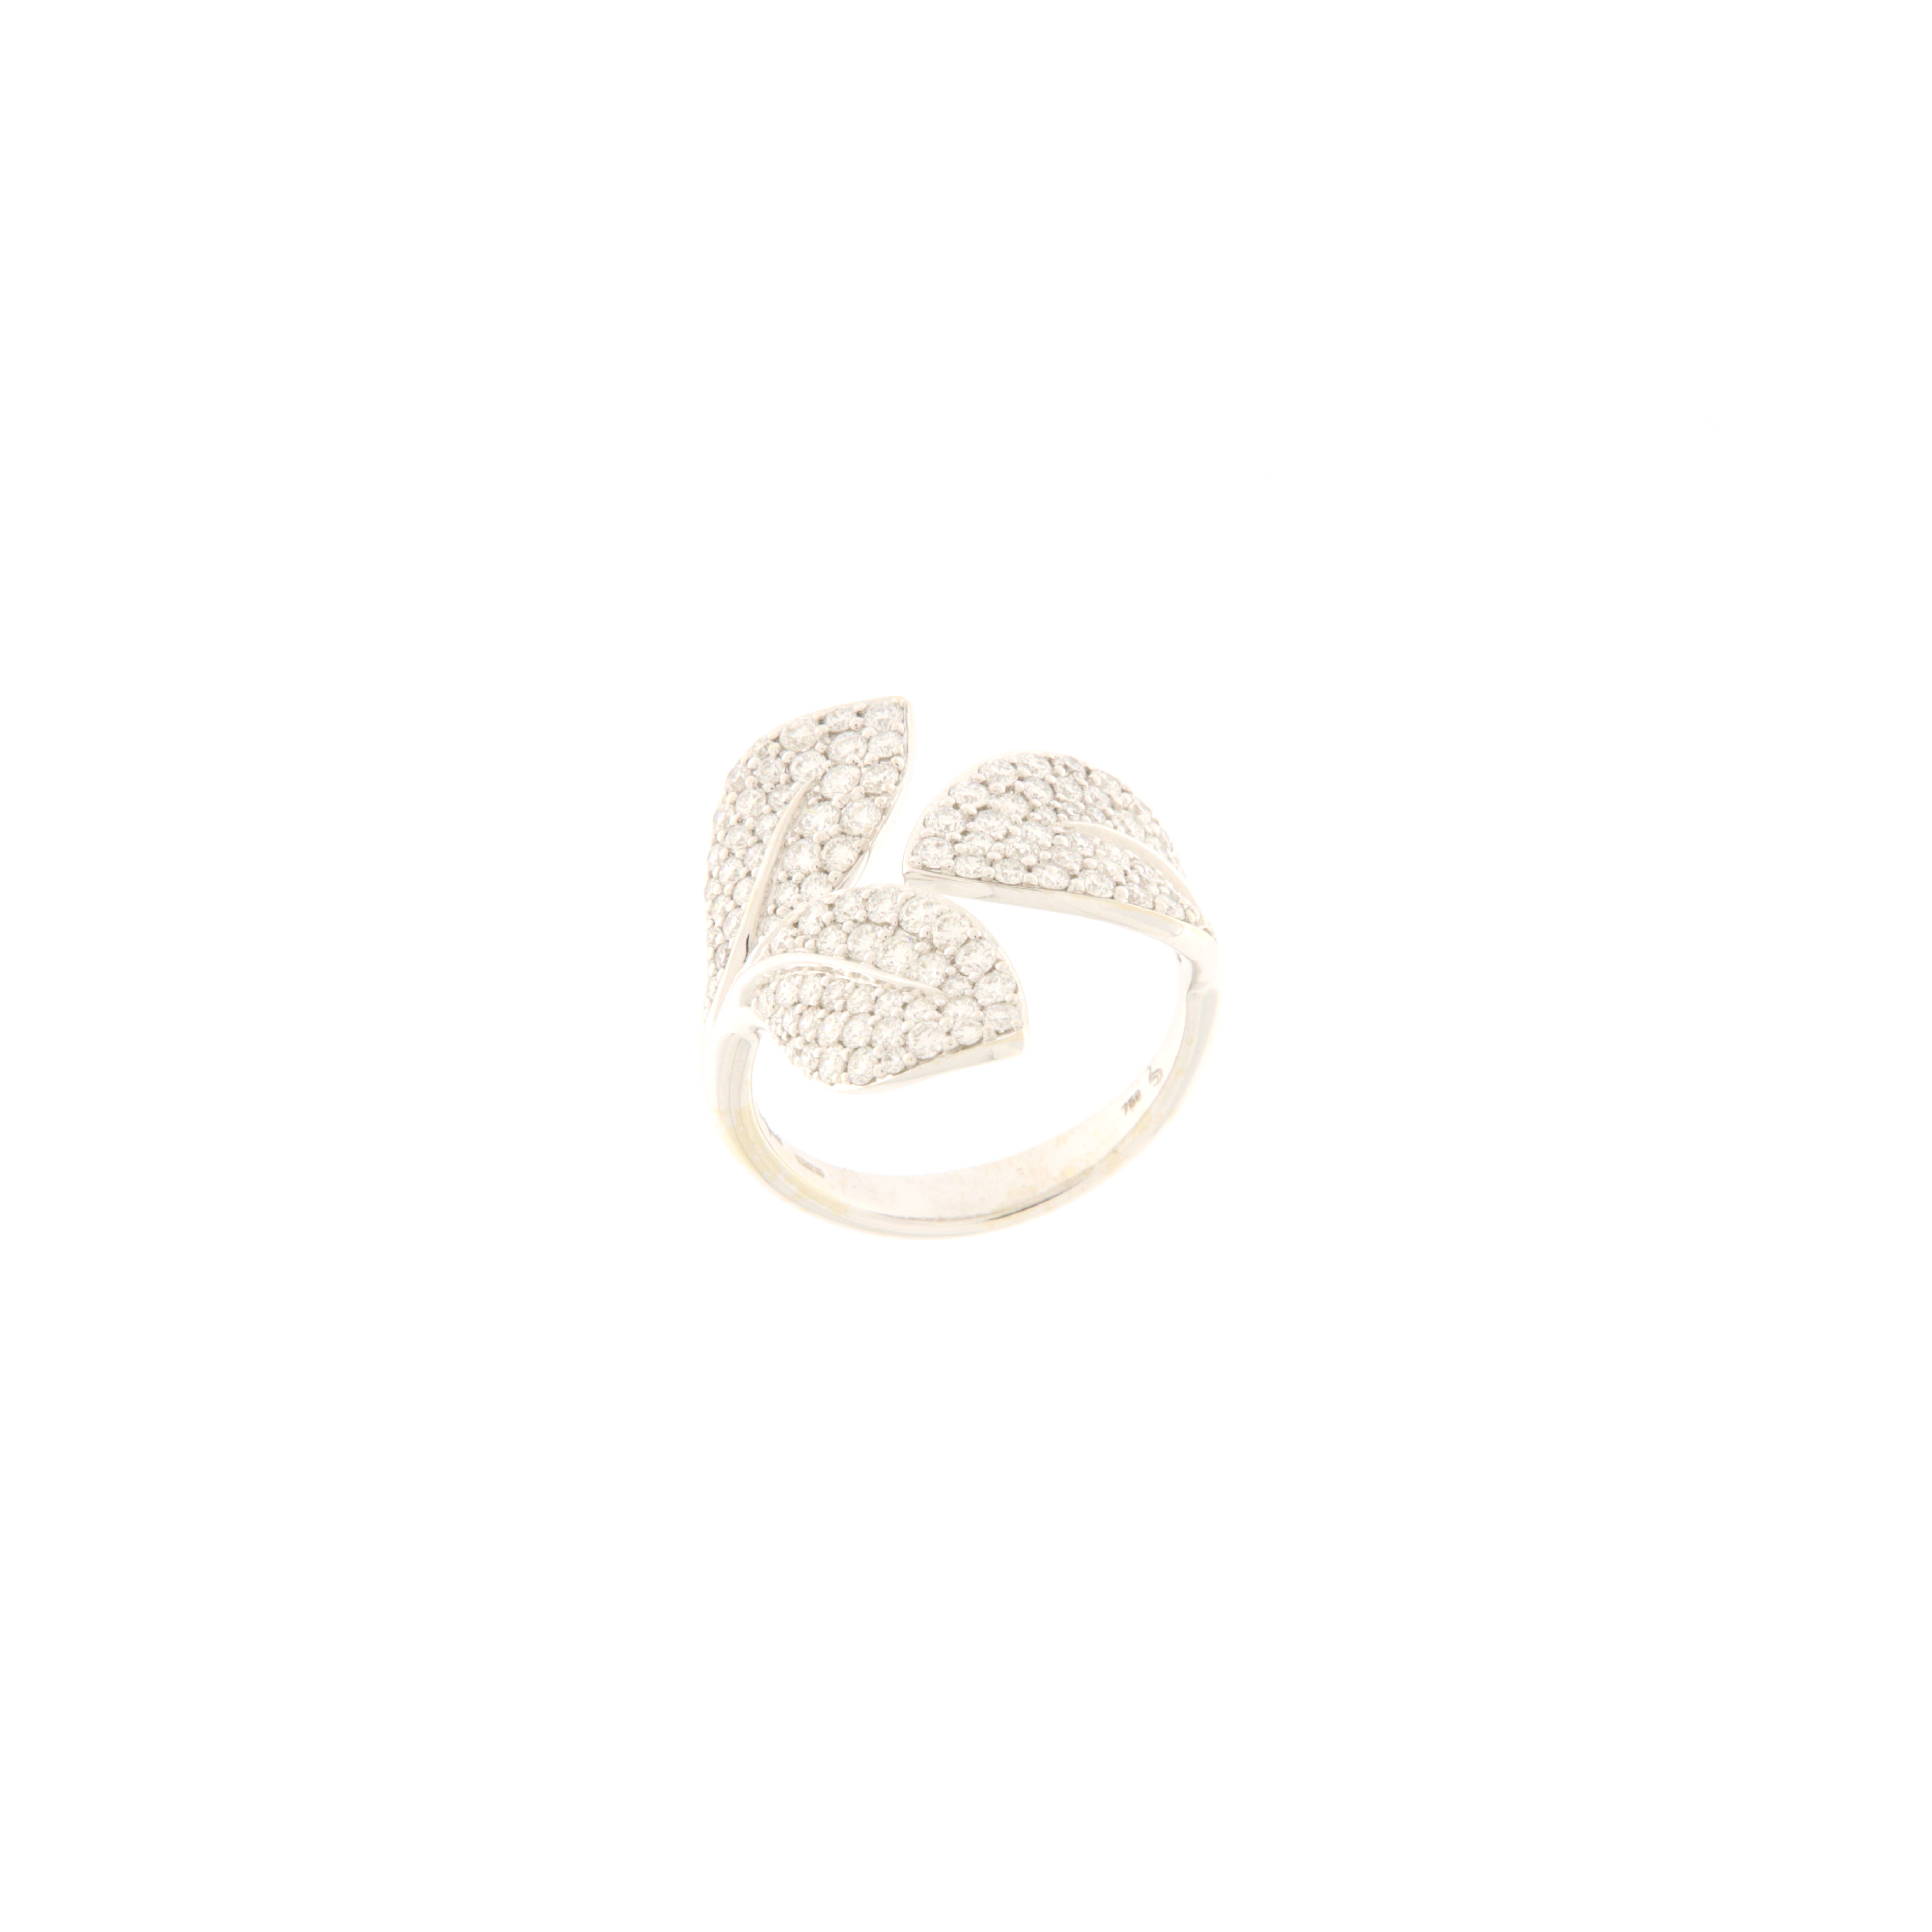 18K white gold ring with design of three leaves creating an embrace in the central part. The ring stays flat on the finger, allowing for very comfortable wearing. The leaves are fully embellished with ct. 1.37 diamonds.